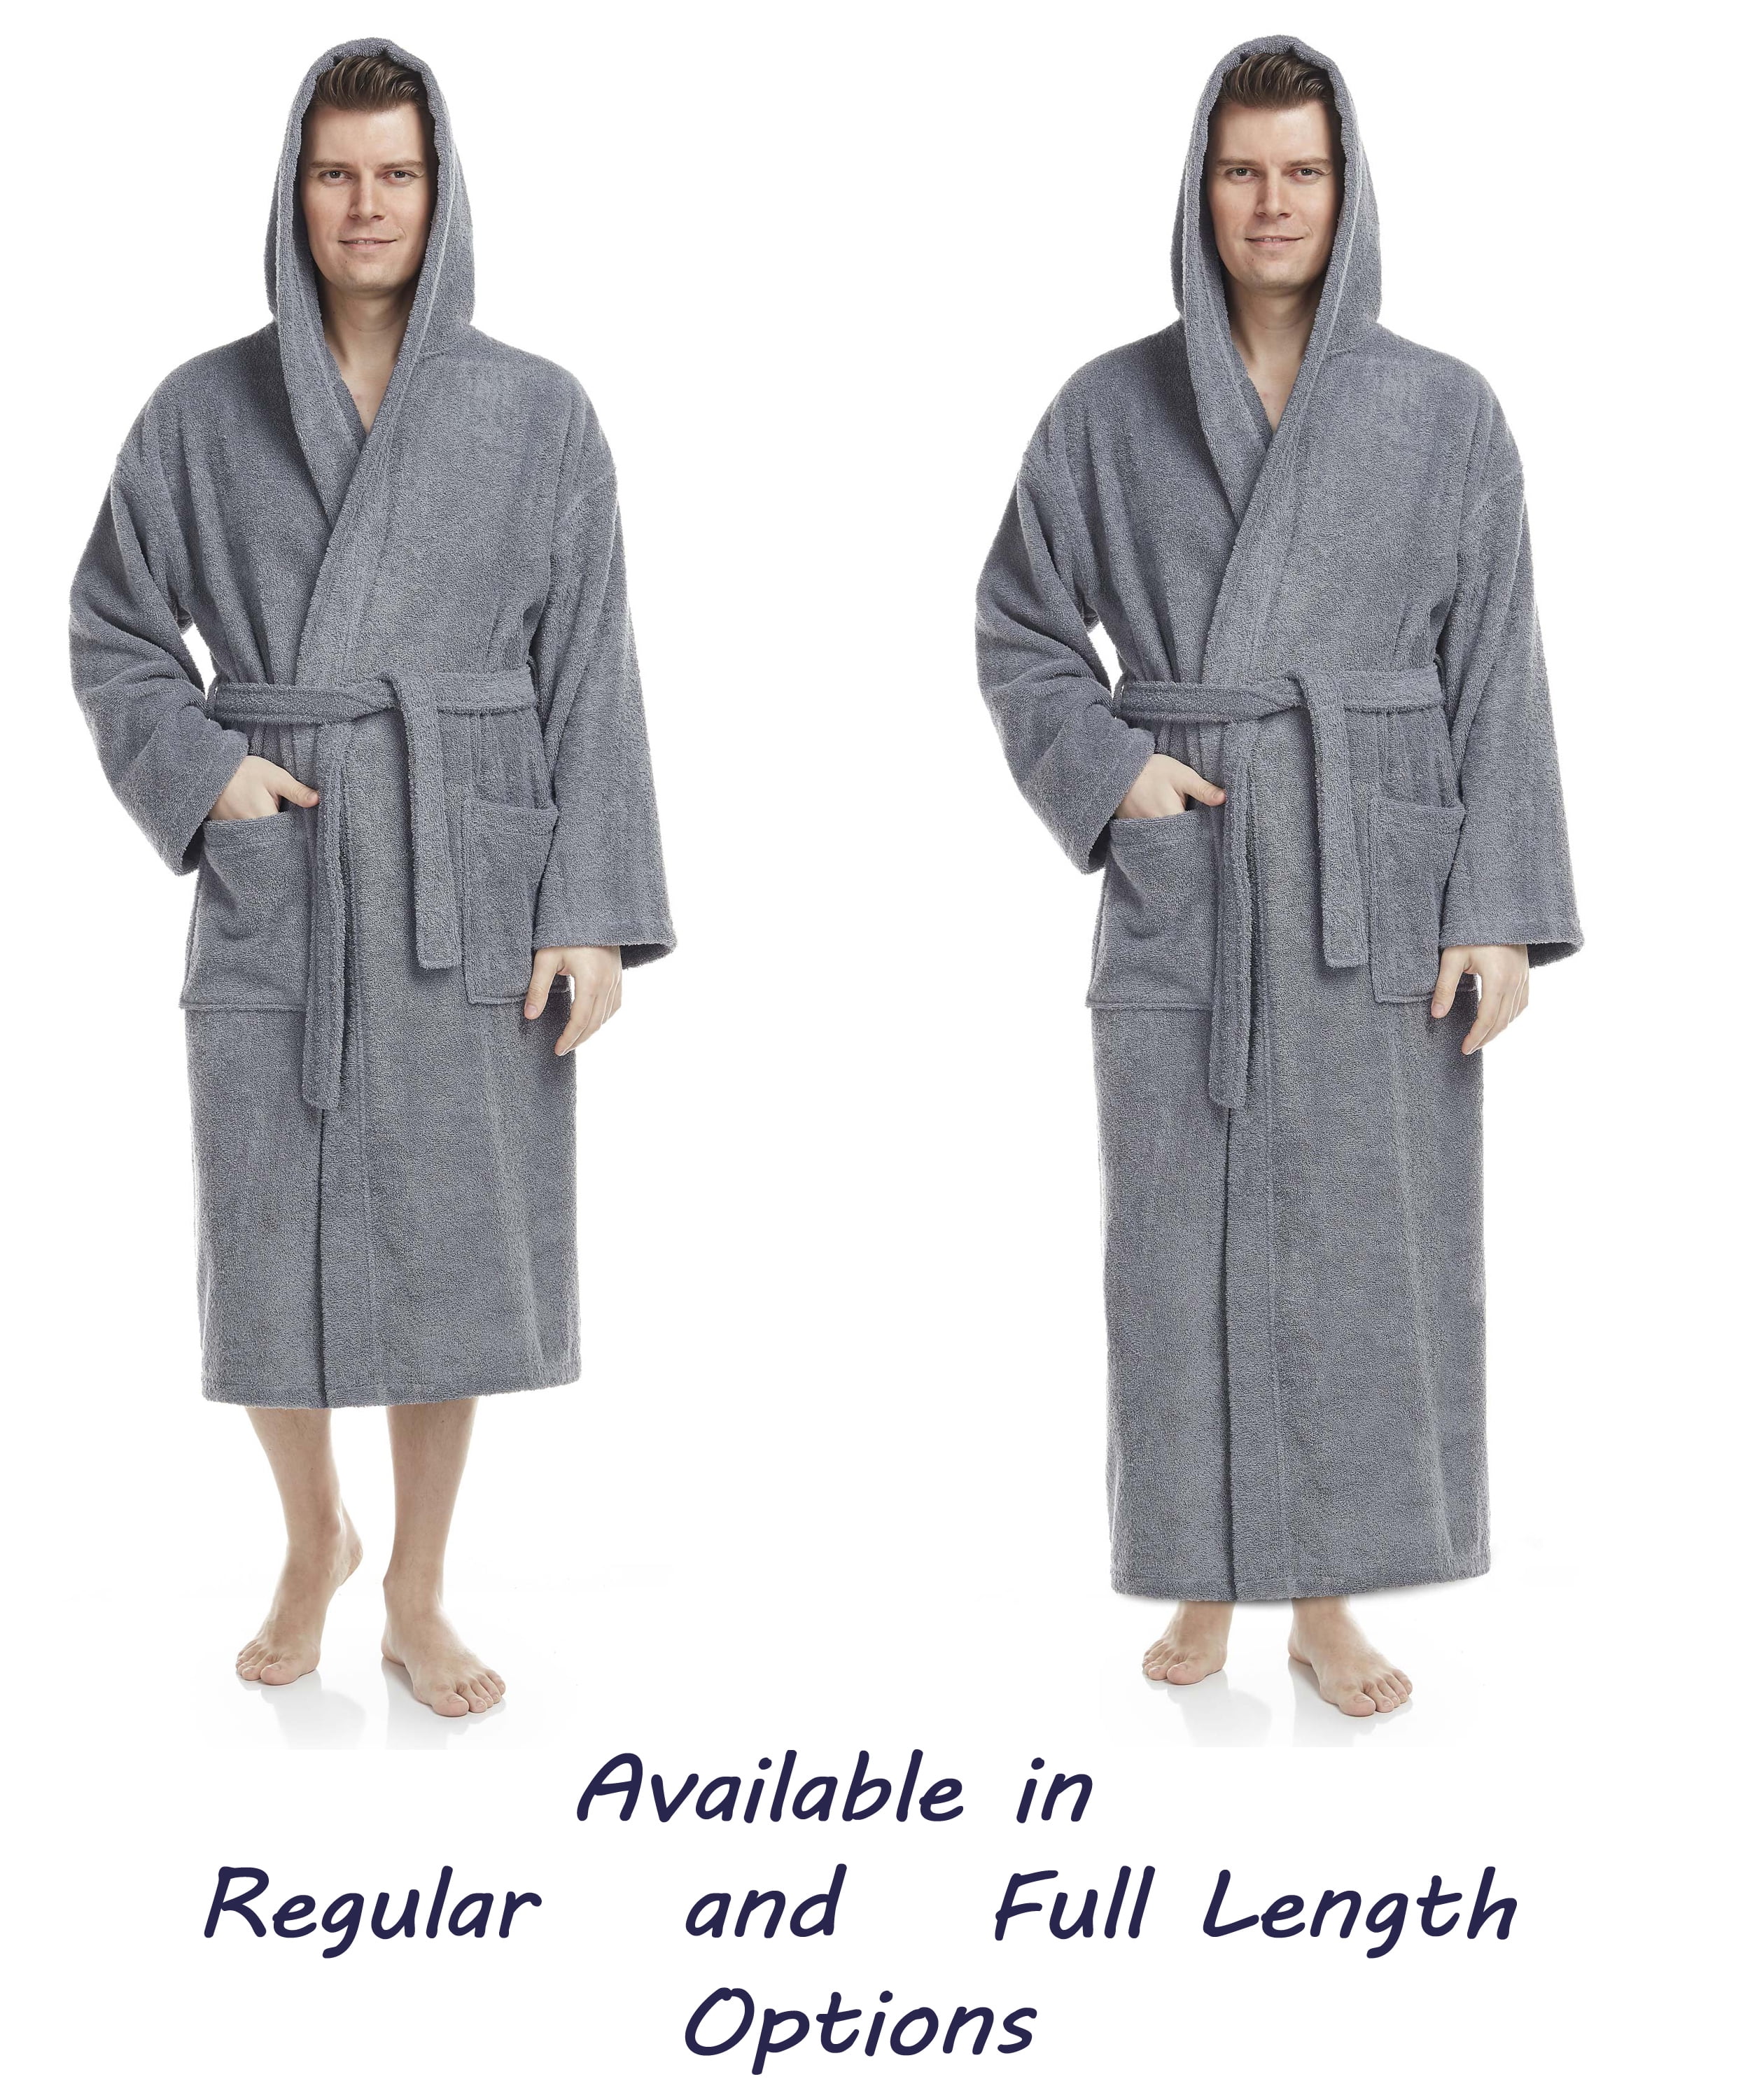 Brand New Cotton Hooded Style Bath Robe 